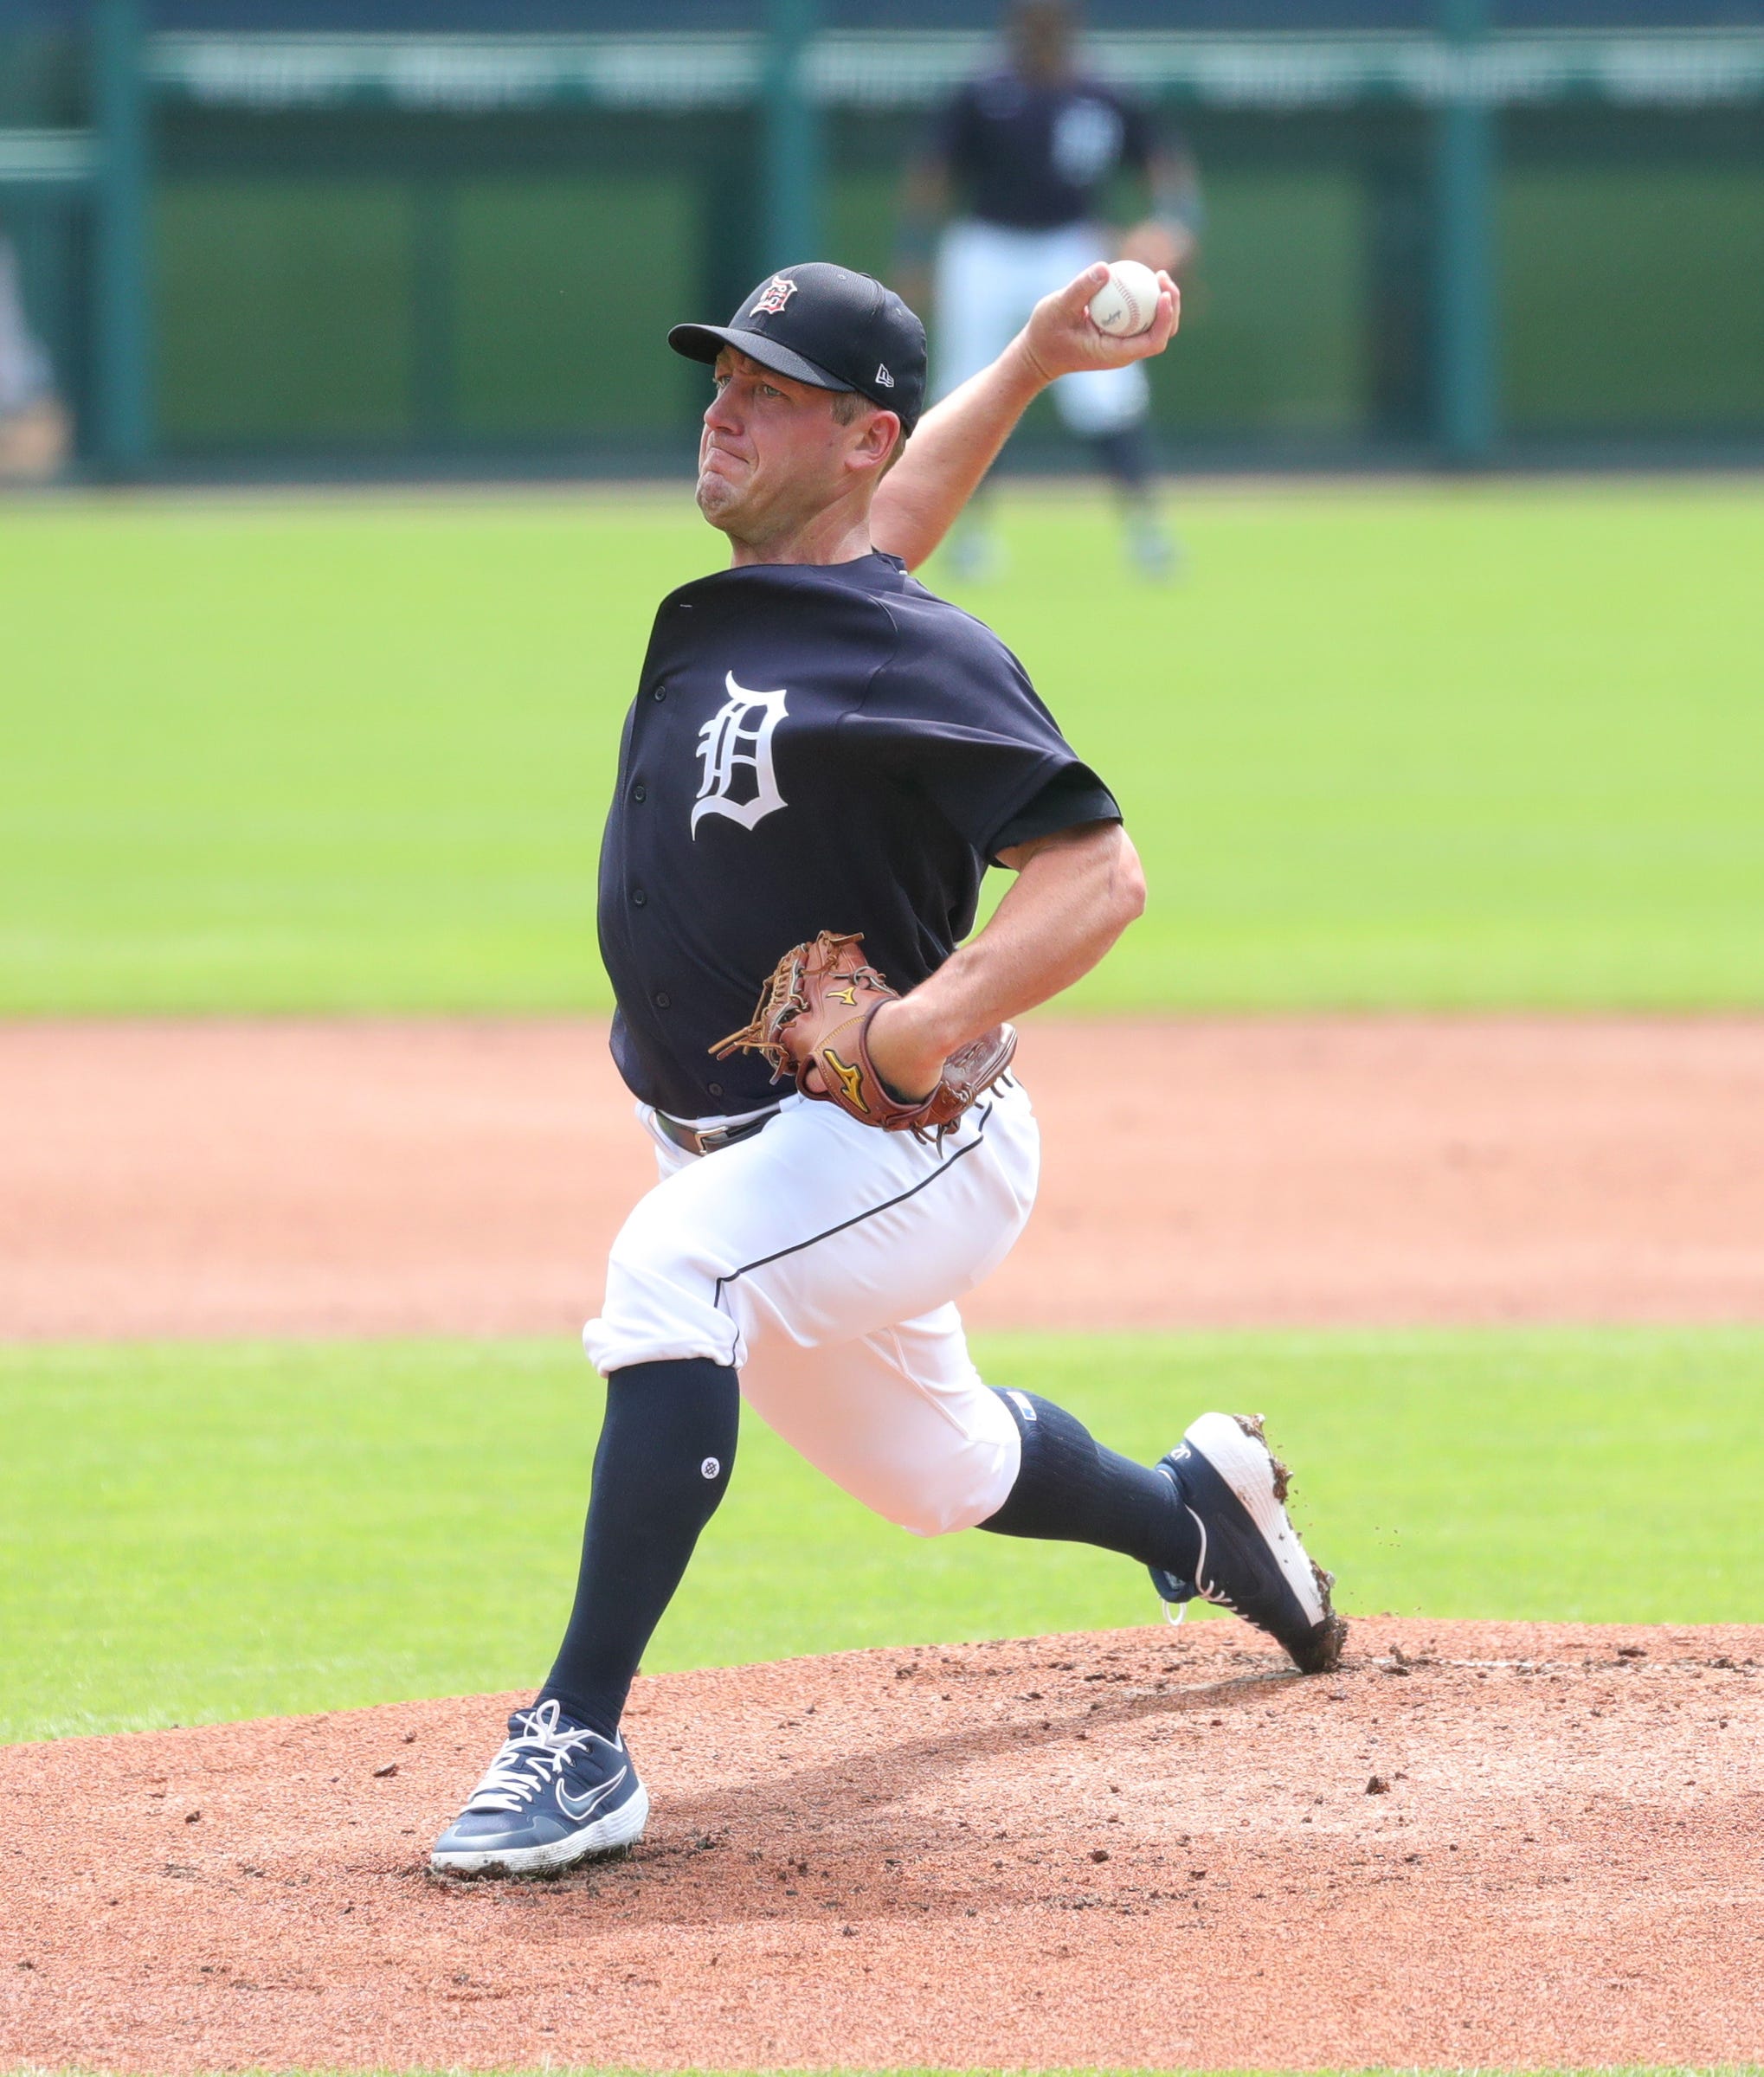 Detroit Tigers' Jordan Zimmermann pitches during an intrasquad scrimmage at Comerica Park, Sunday, July 12, 2020.